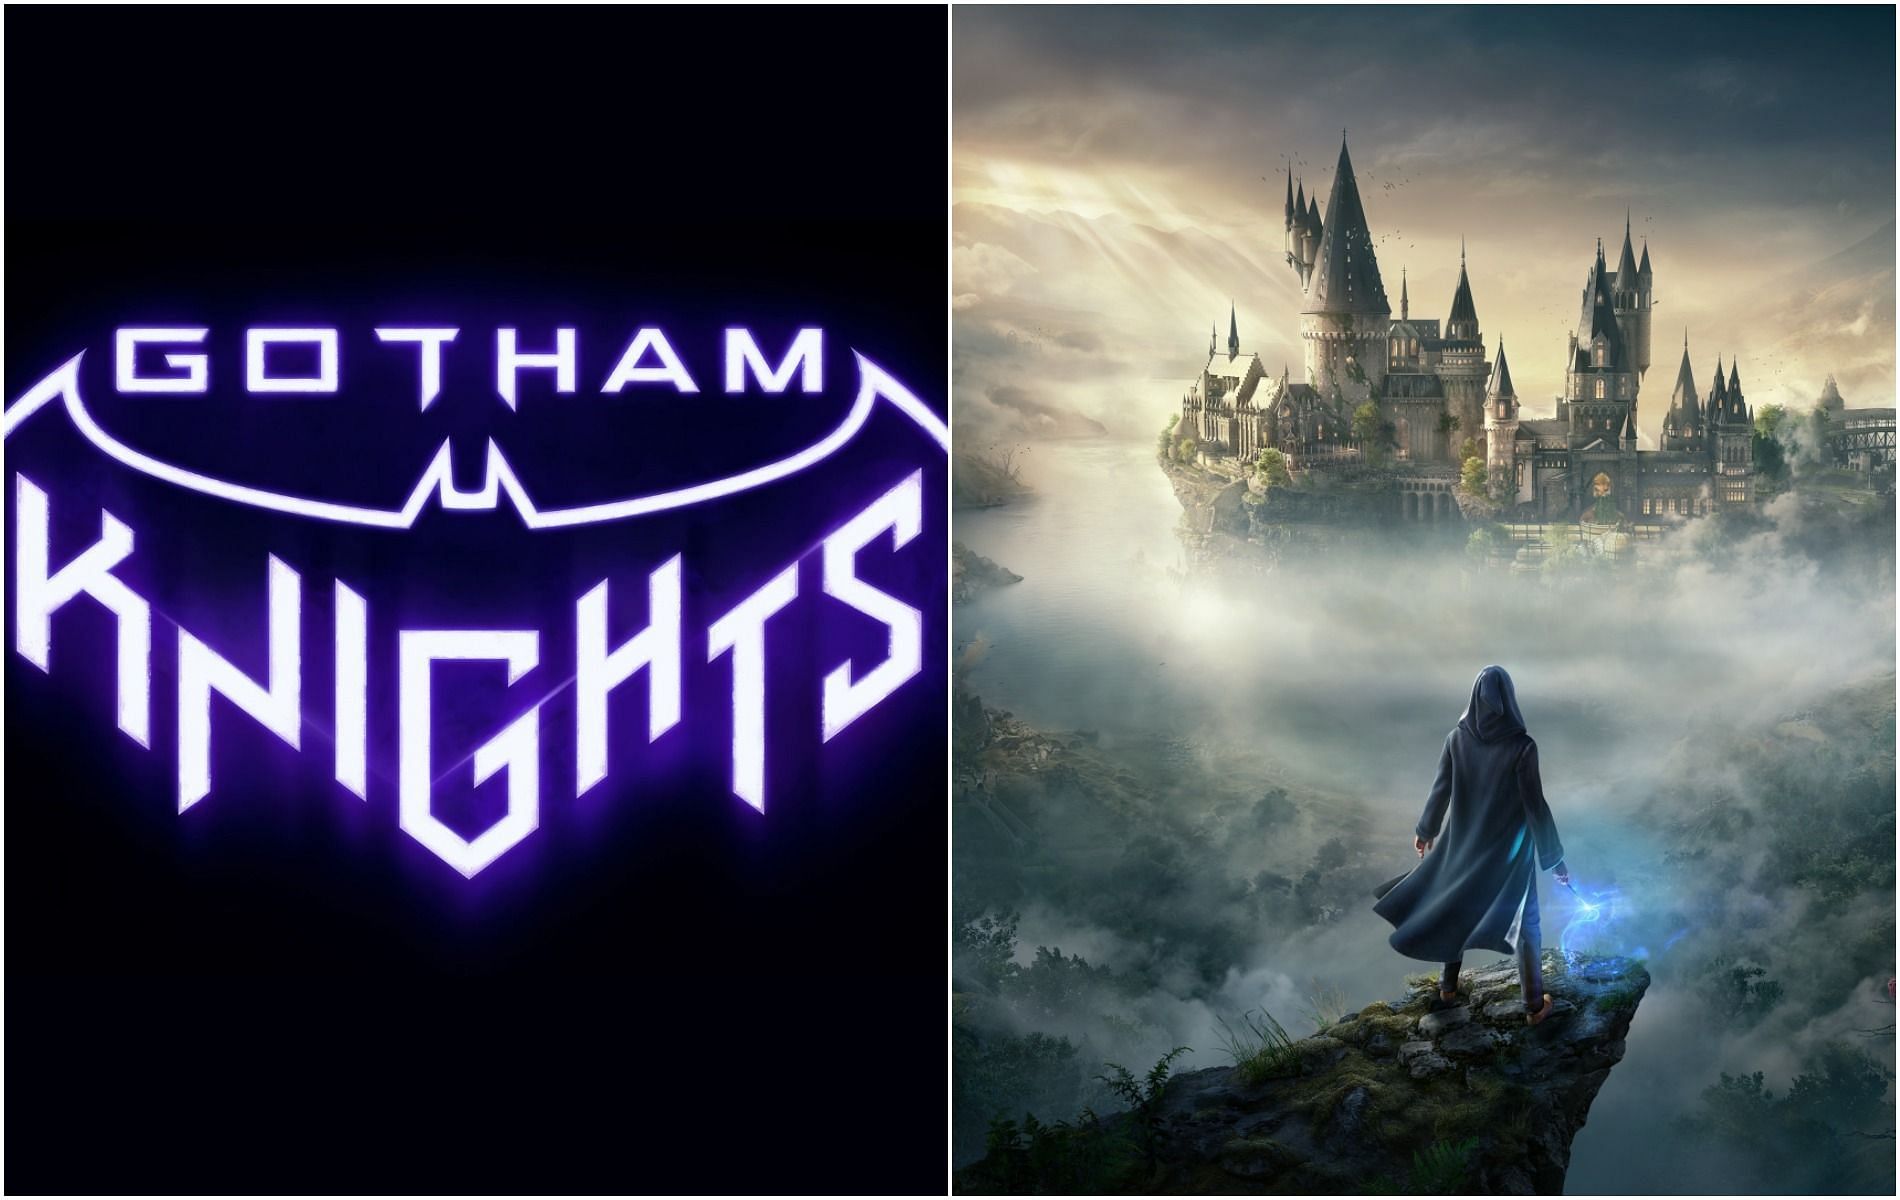 Gotham Knights and Hogwarts Legacy are scheduled to appear in 2022 (image via Sportskeeda)